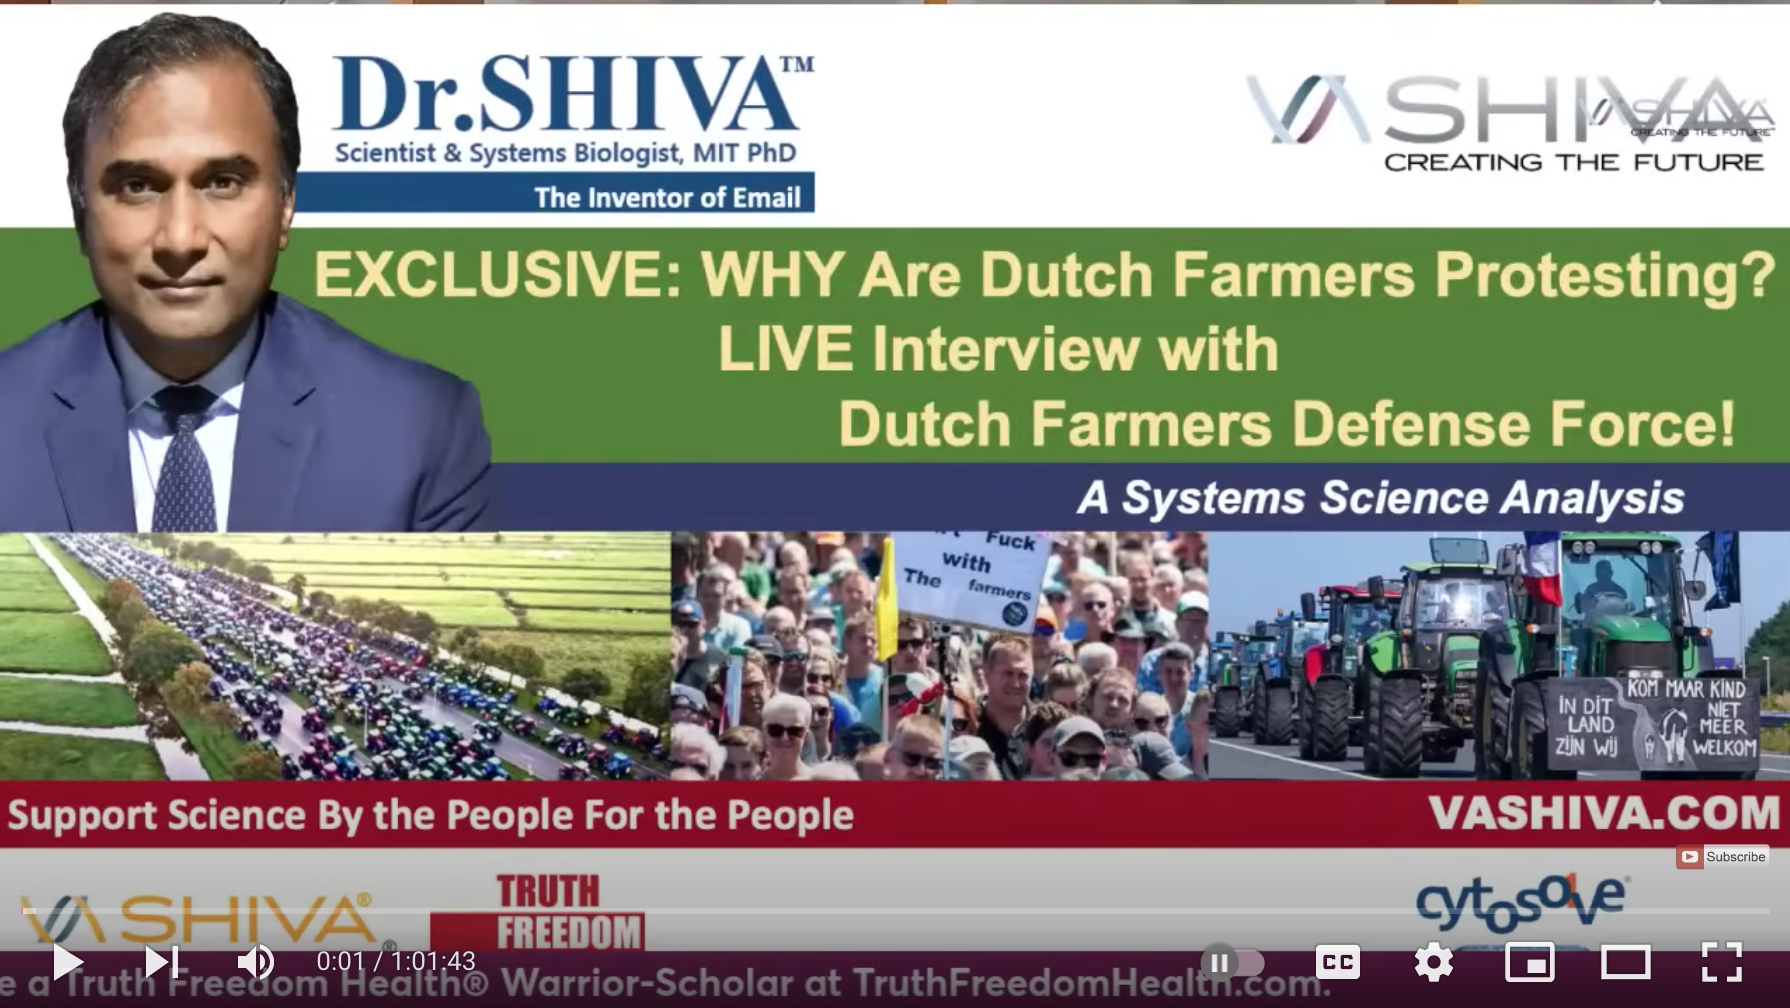 Dr.SHIVA LIVE: EXCLUSIVE: WHY Are Dutch Farmers Protesting? Interview: Farmers Defense Force!